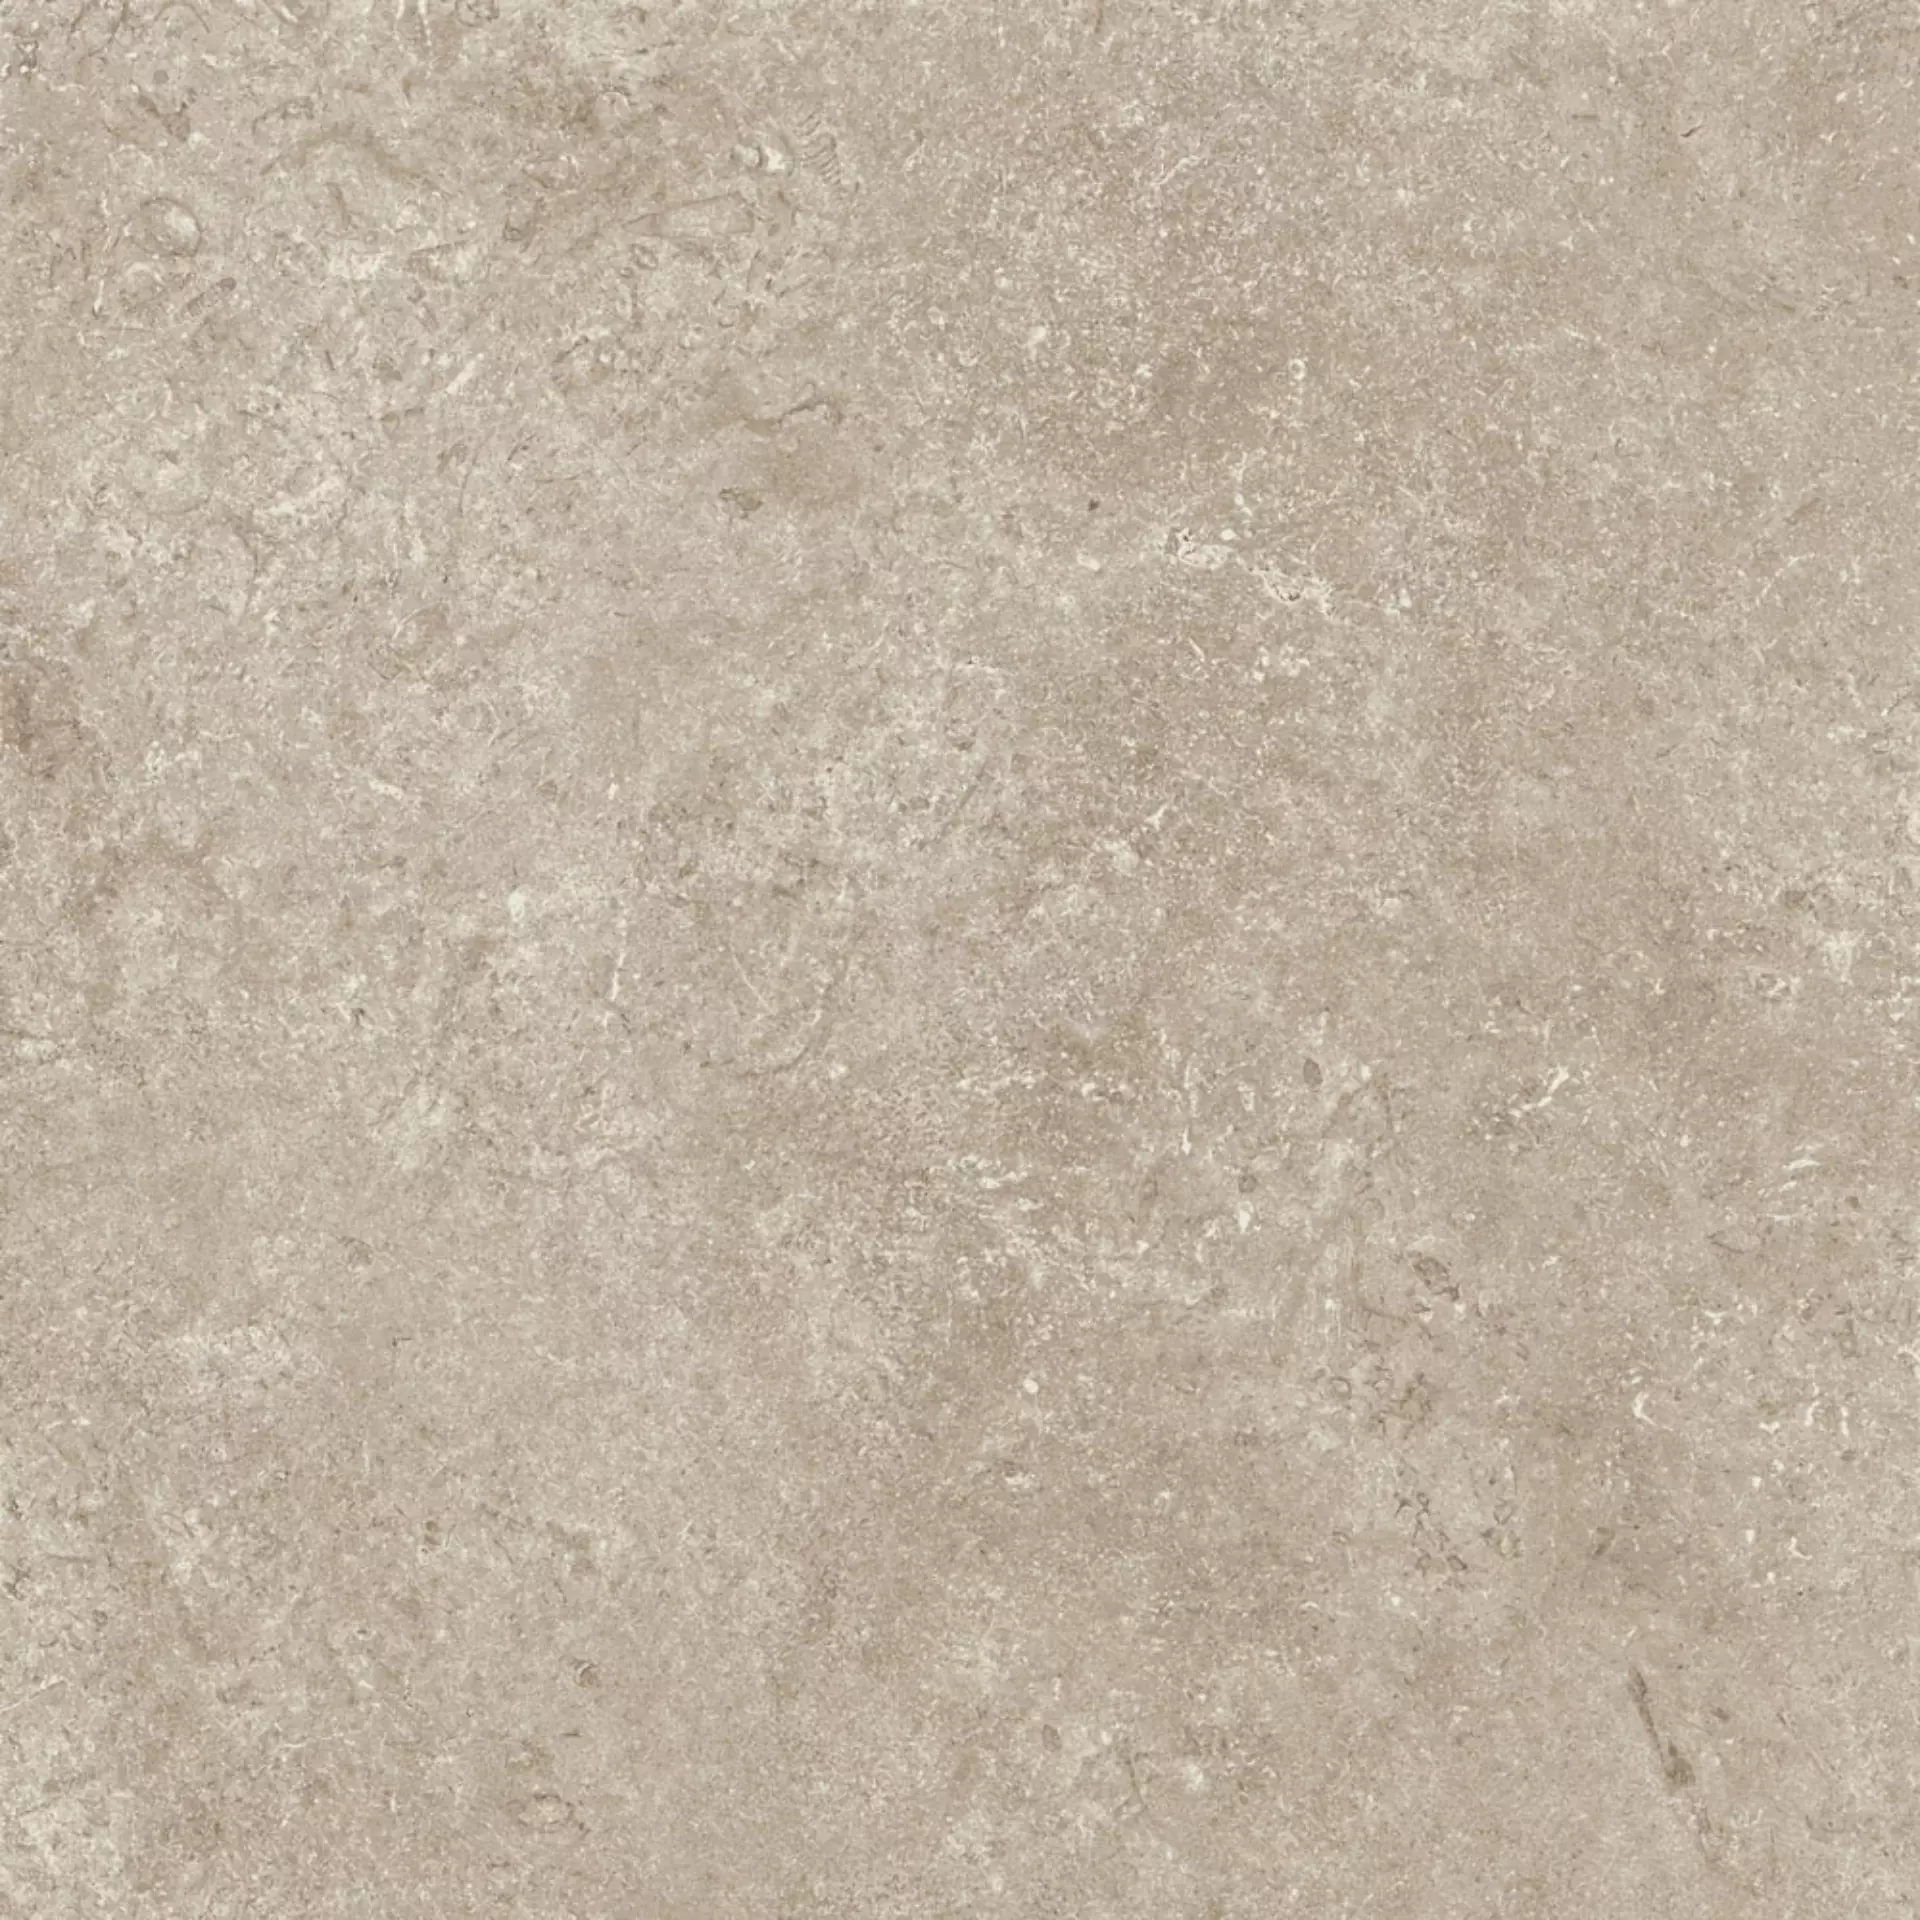 Cottodeste Secret Stone Shadow Grey Honed Protect EGWSSX3 60x60cm rectified 14mm